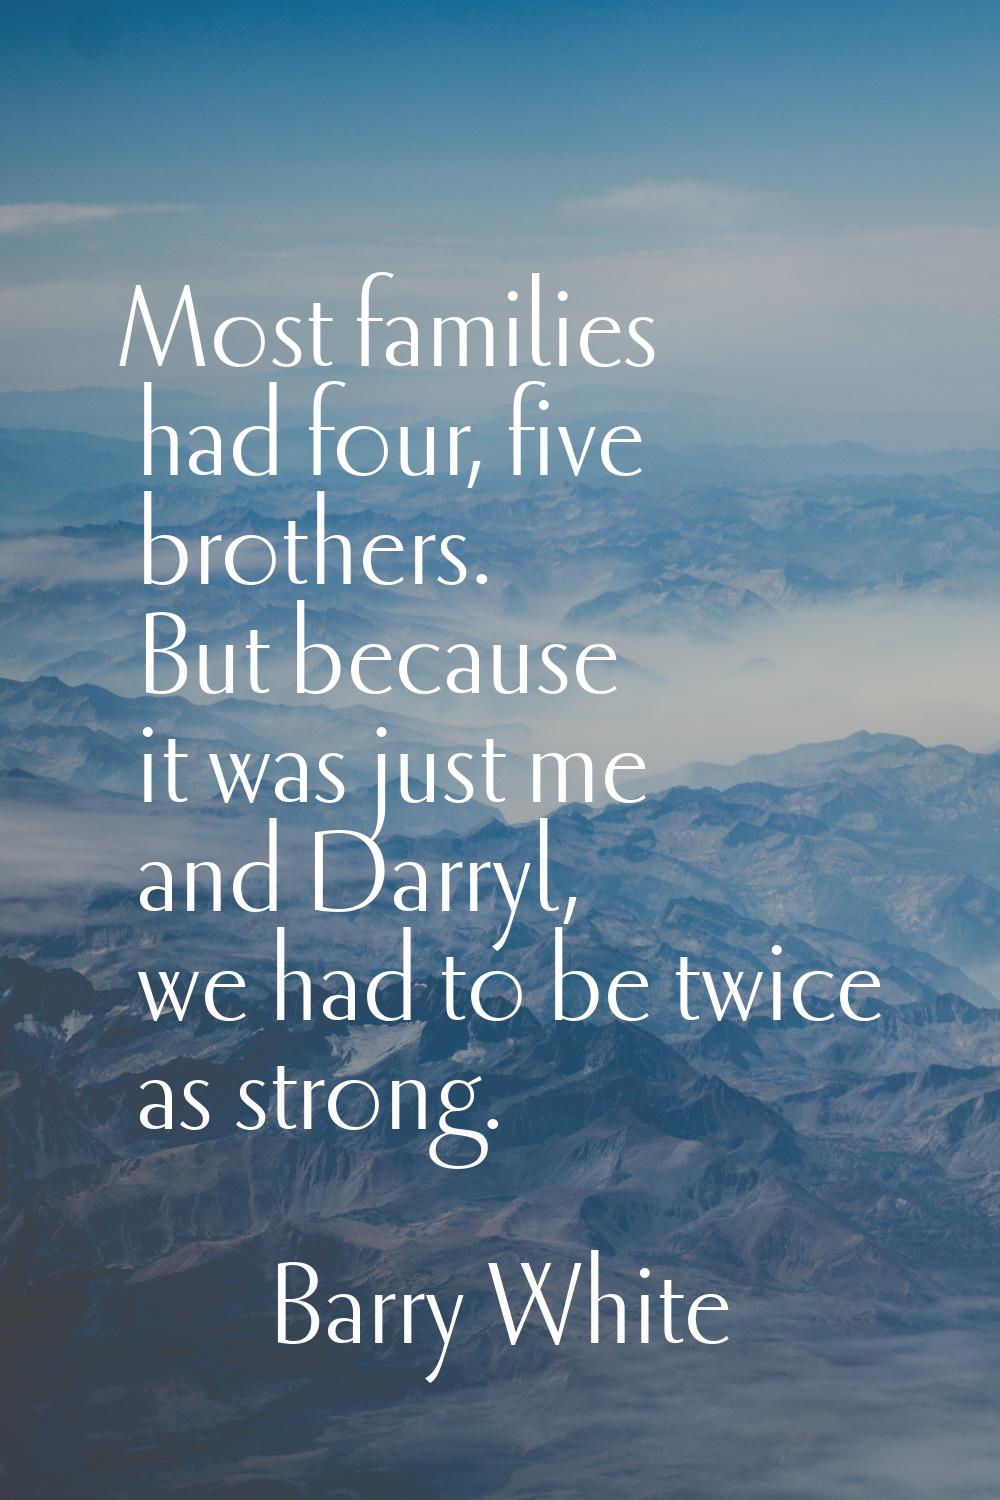 Most families had four, five brothers. But because it was just me and Darryl, we had to be twice as